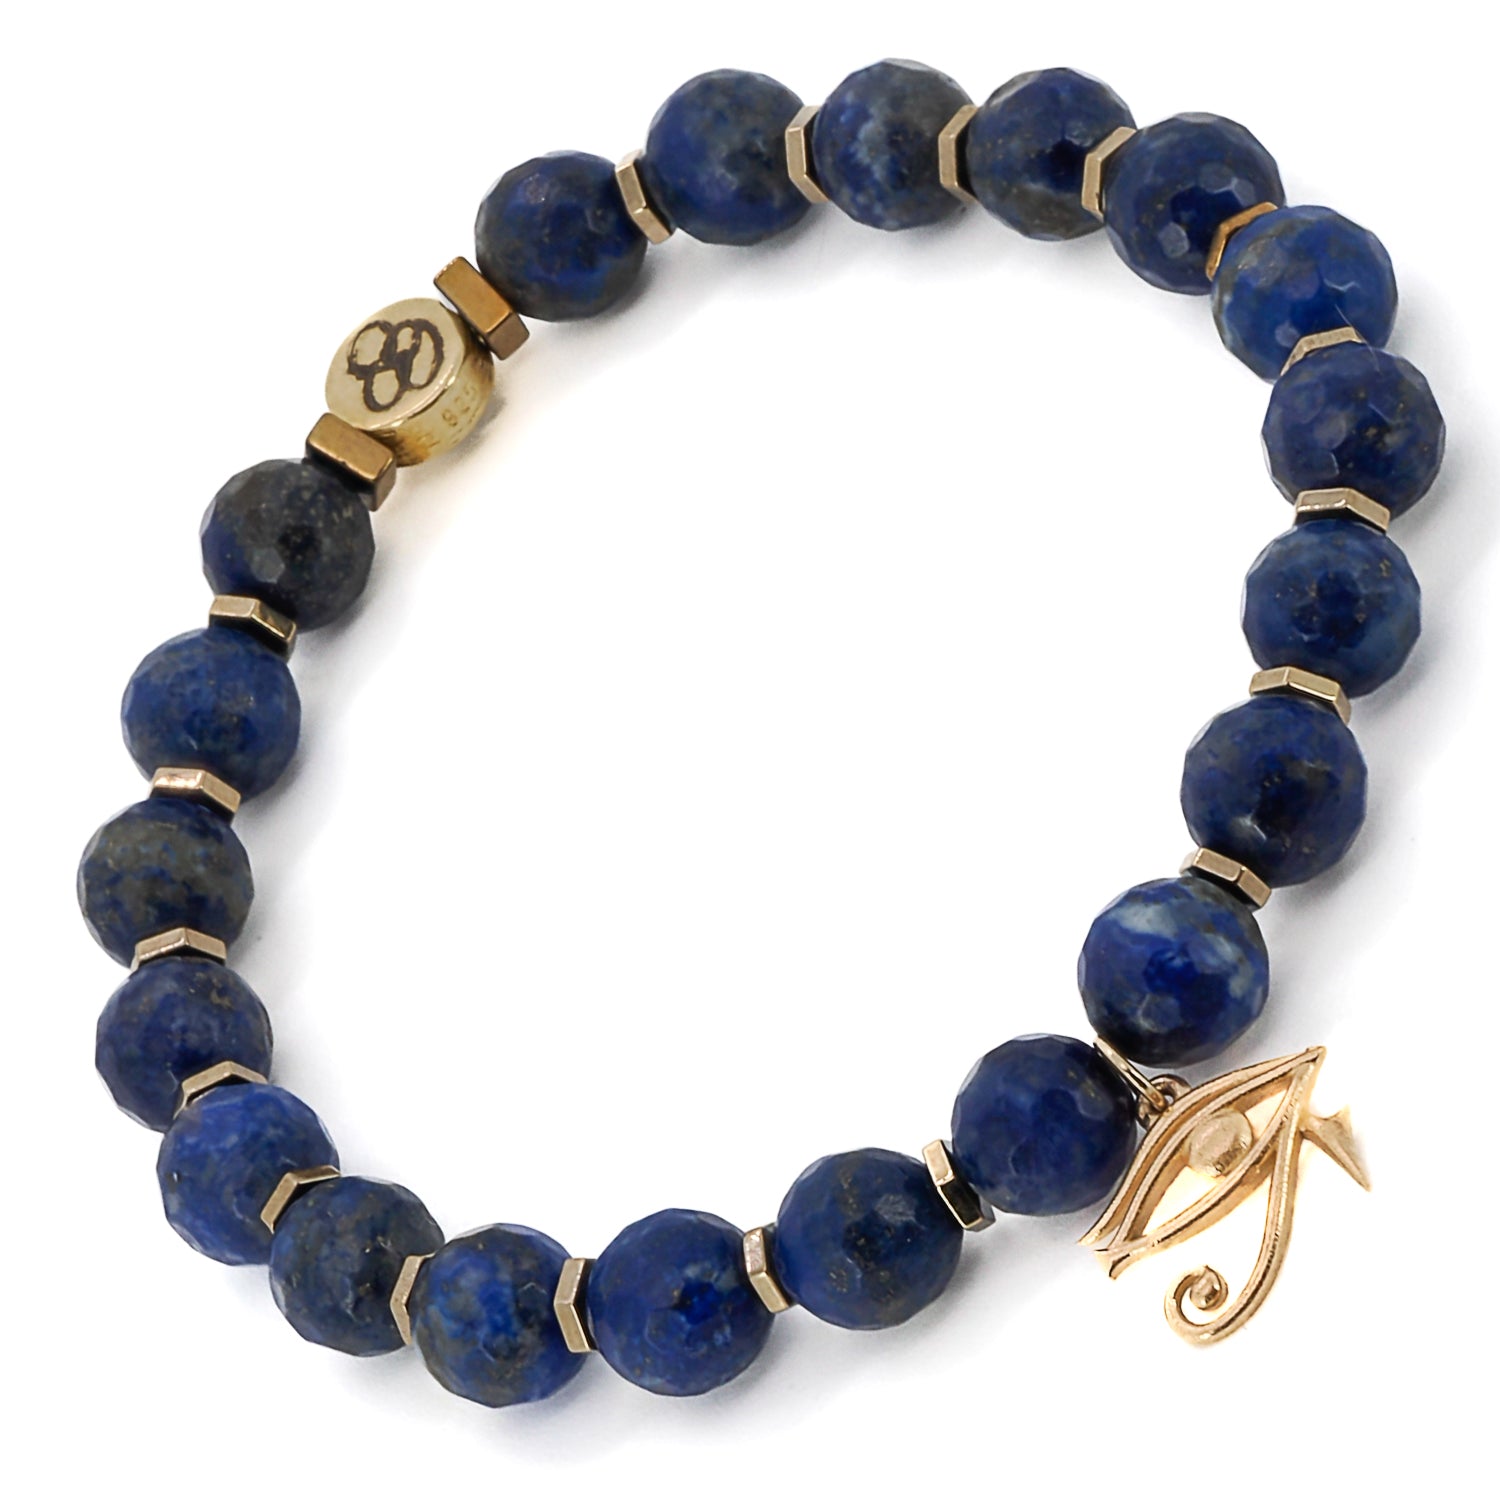 The Solid Gold Eye of Ra Spiritual Beaded Bracelet combines the elegance of solid gold with the spiritual properties of lapis lazuli, creating a truly exceptional accessory.